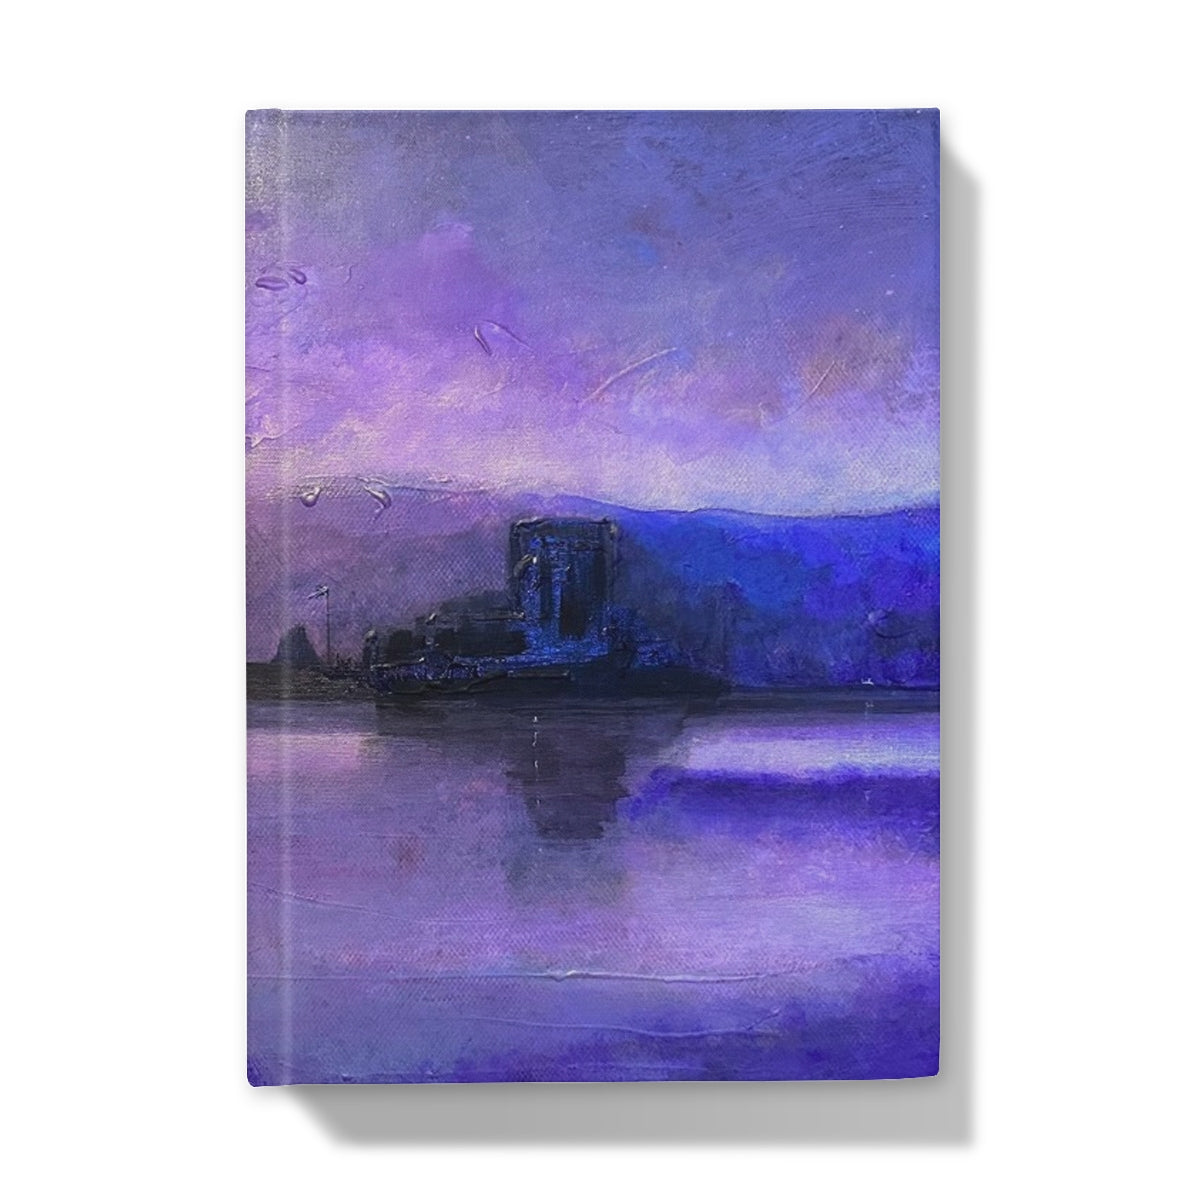 Eilean Donan Castle Moonset Art Gifts Hardback Journal-Journals & Notebooks-Historic & Iconic Scotland Art Gallery-5"x7"-Lined-Paintings, Prints, Homeware, Art Gifts From Scotland By Scottish Artist Kevin Hunter